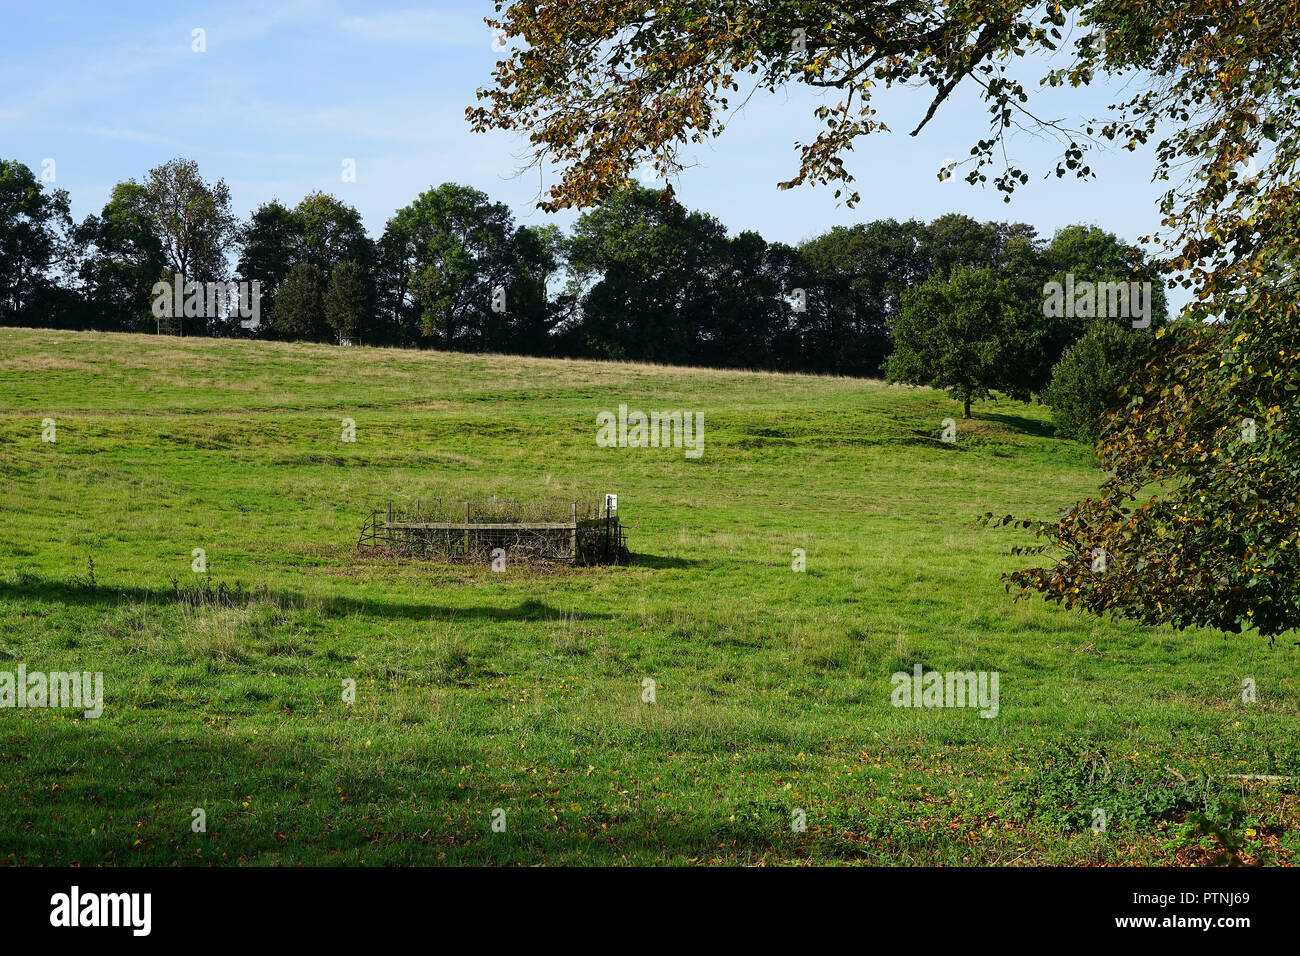 Jane Austen's birthplace - the site of the old rectory at Steventon Stock Photo